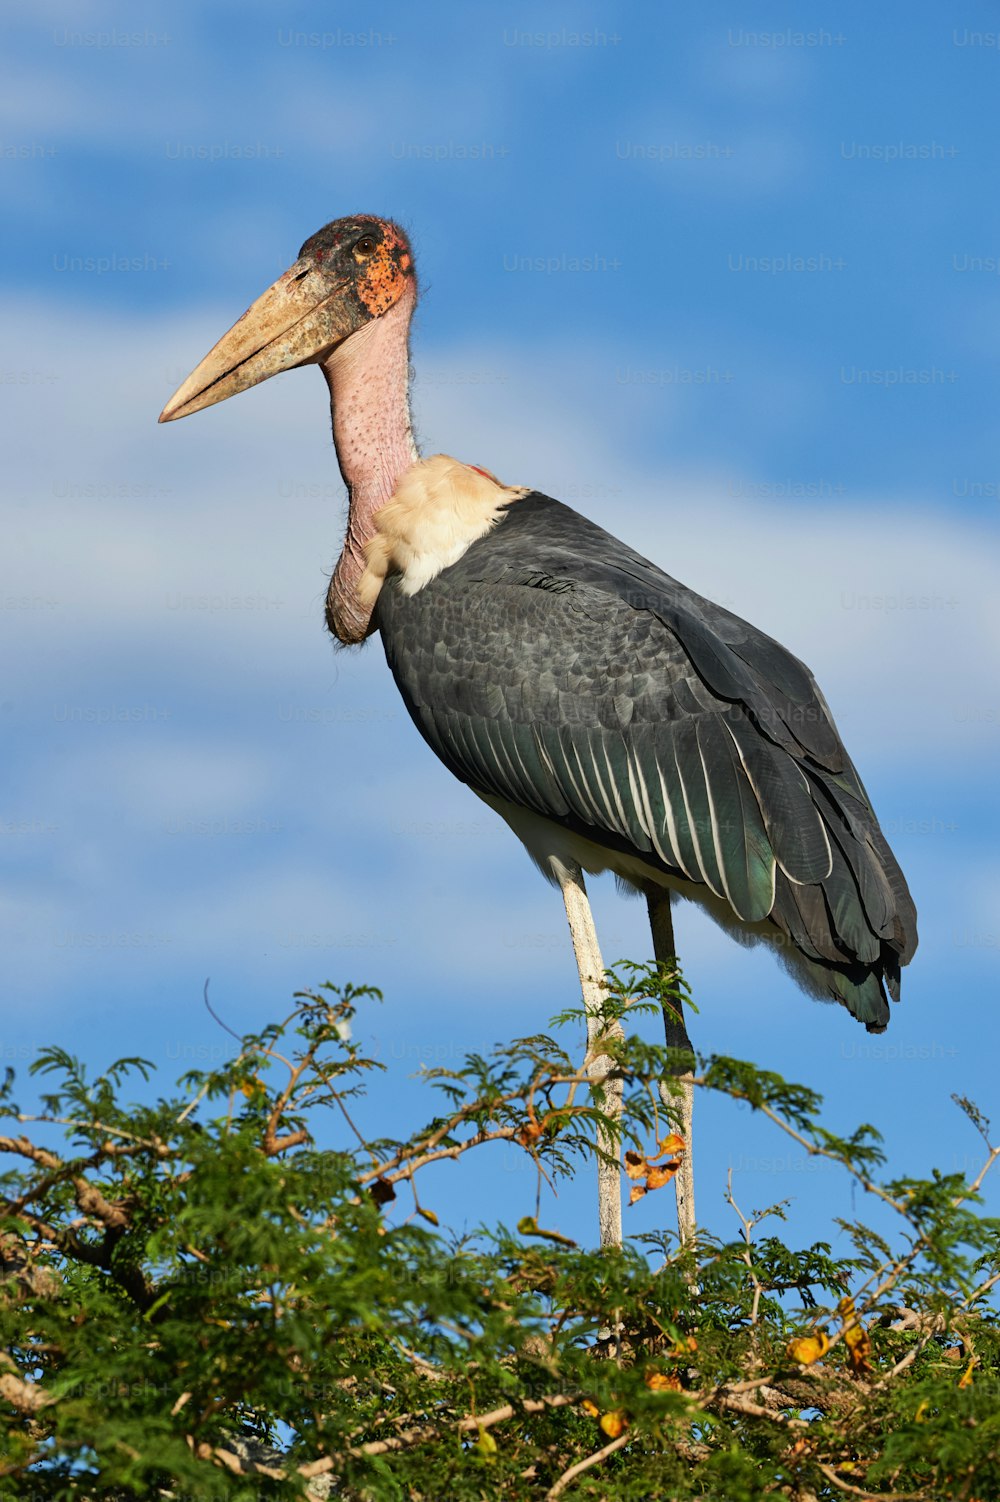 Big and ugly marabou stork photographed on the top of a tree.